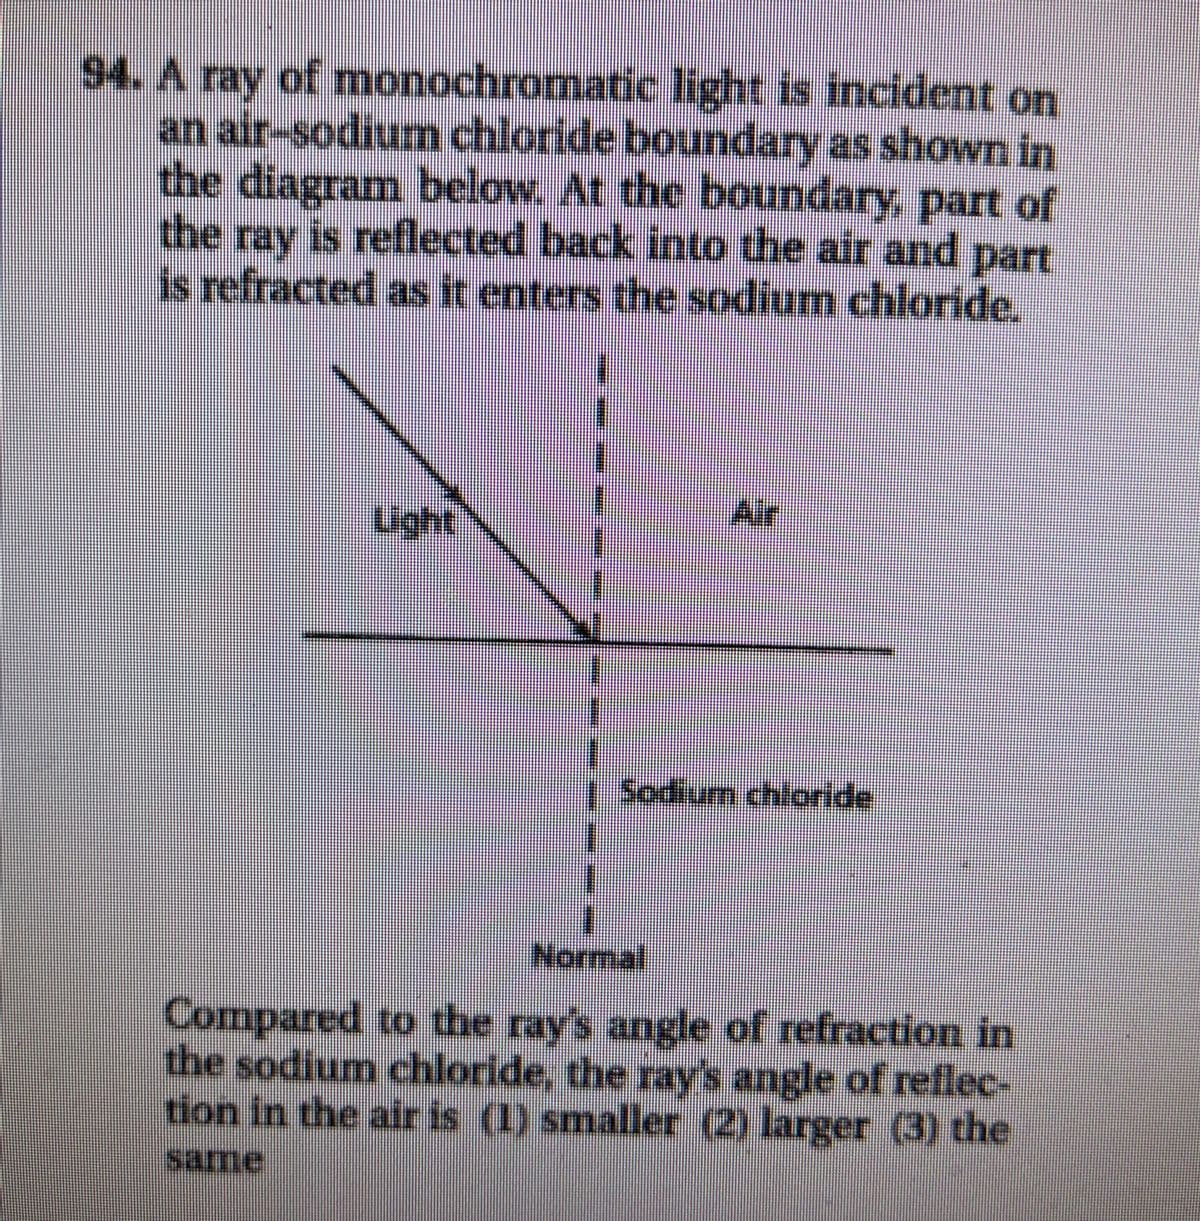 94. A ray of monochromatie light is incident on
an air-sodium chloride boundary as shown in
the diagram below. At the boundary, part of
the ray is reflected back into the air and part
is refracted as it enters the sodium chloride.
Air
Light
Sodium chloride
Normal
Compared to the ray's angle of refraction in
the sodium chloride, the ray's angle of reflec-
tion in the air is (1) smaller (2) larger (3) the
same
